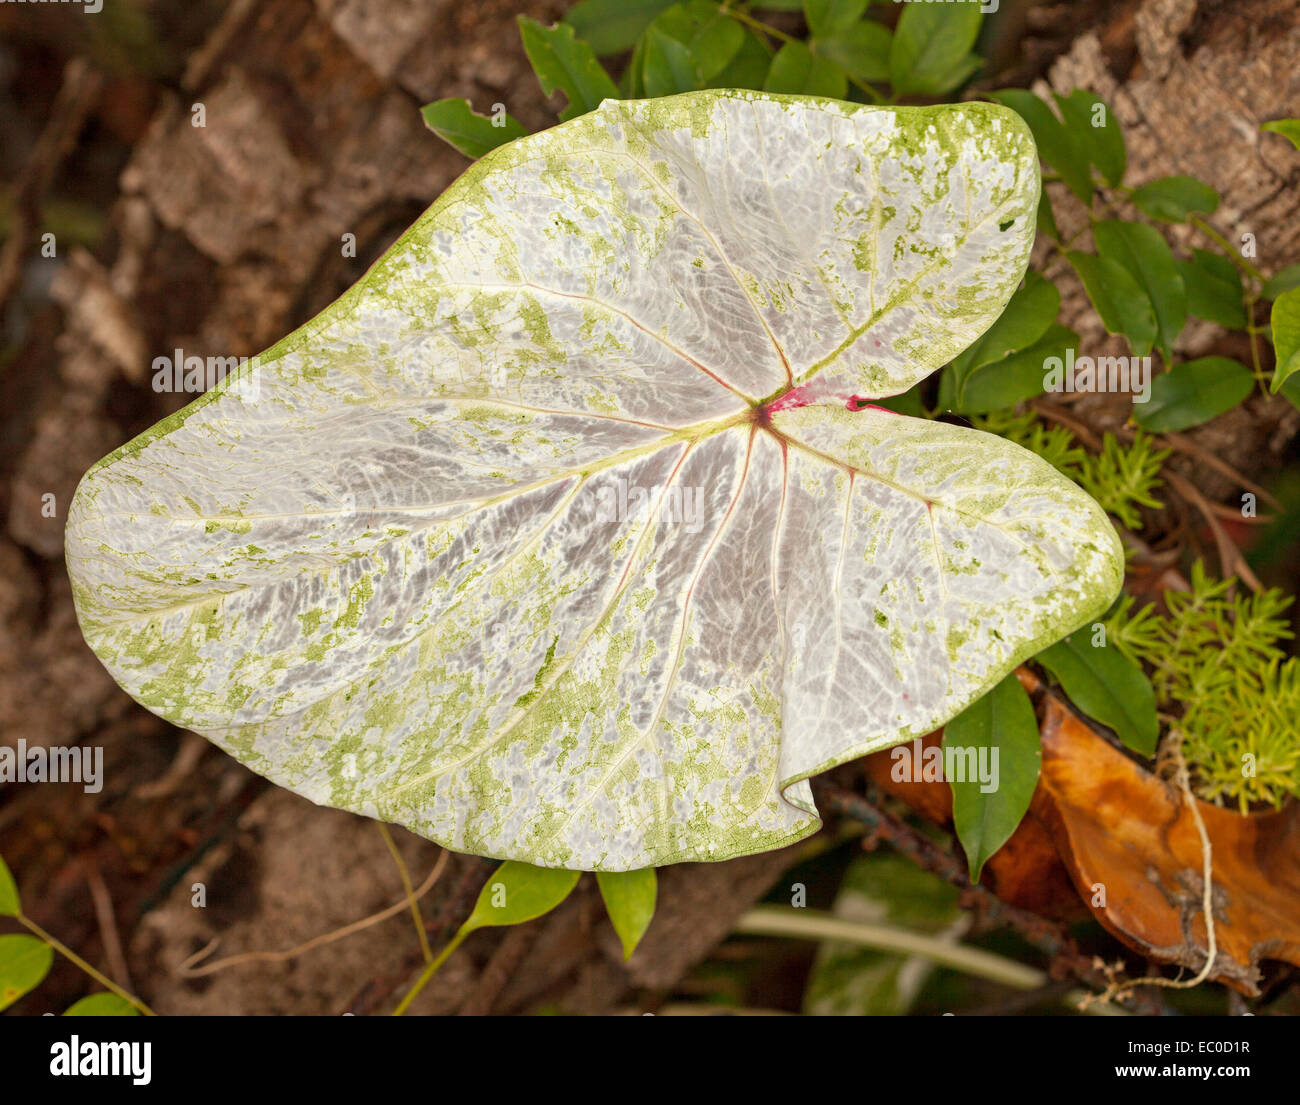 Large almost transparent Caladium leaf, white with splashes of light green and touch of red by stem Stock Photo